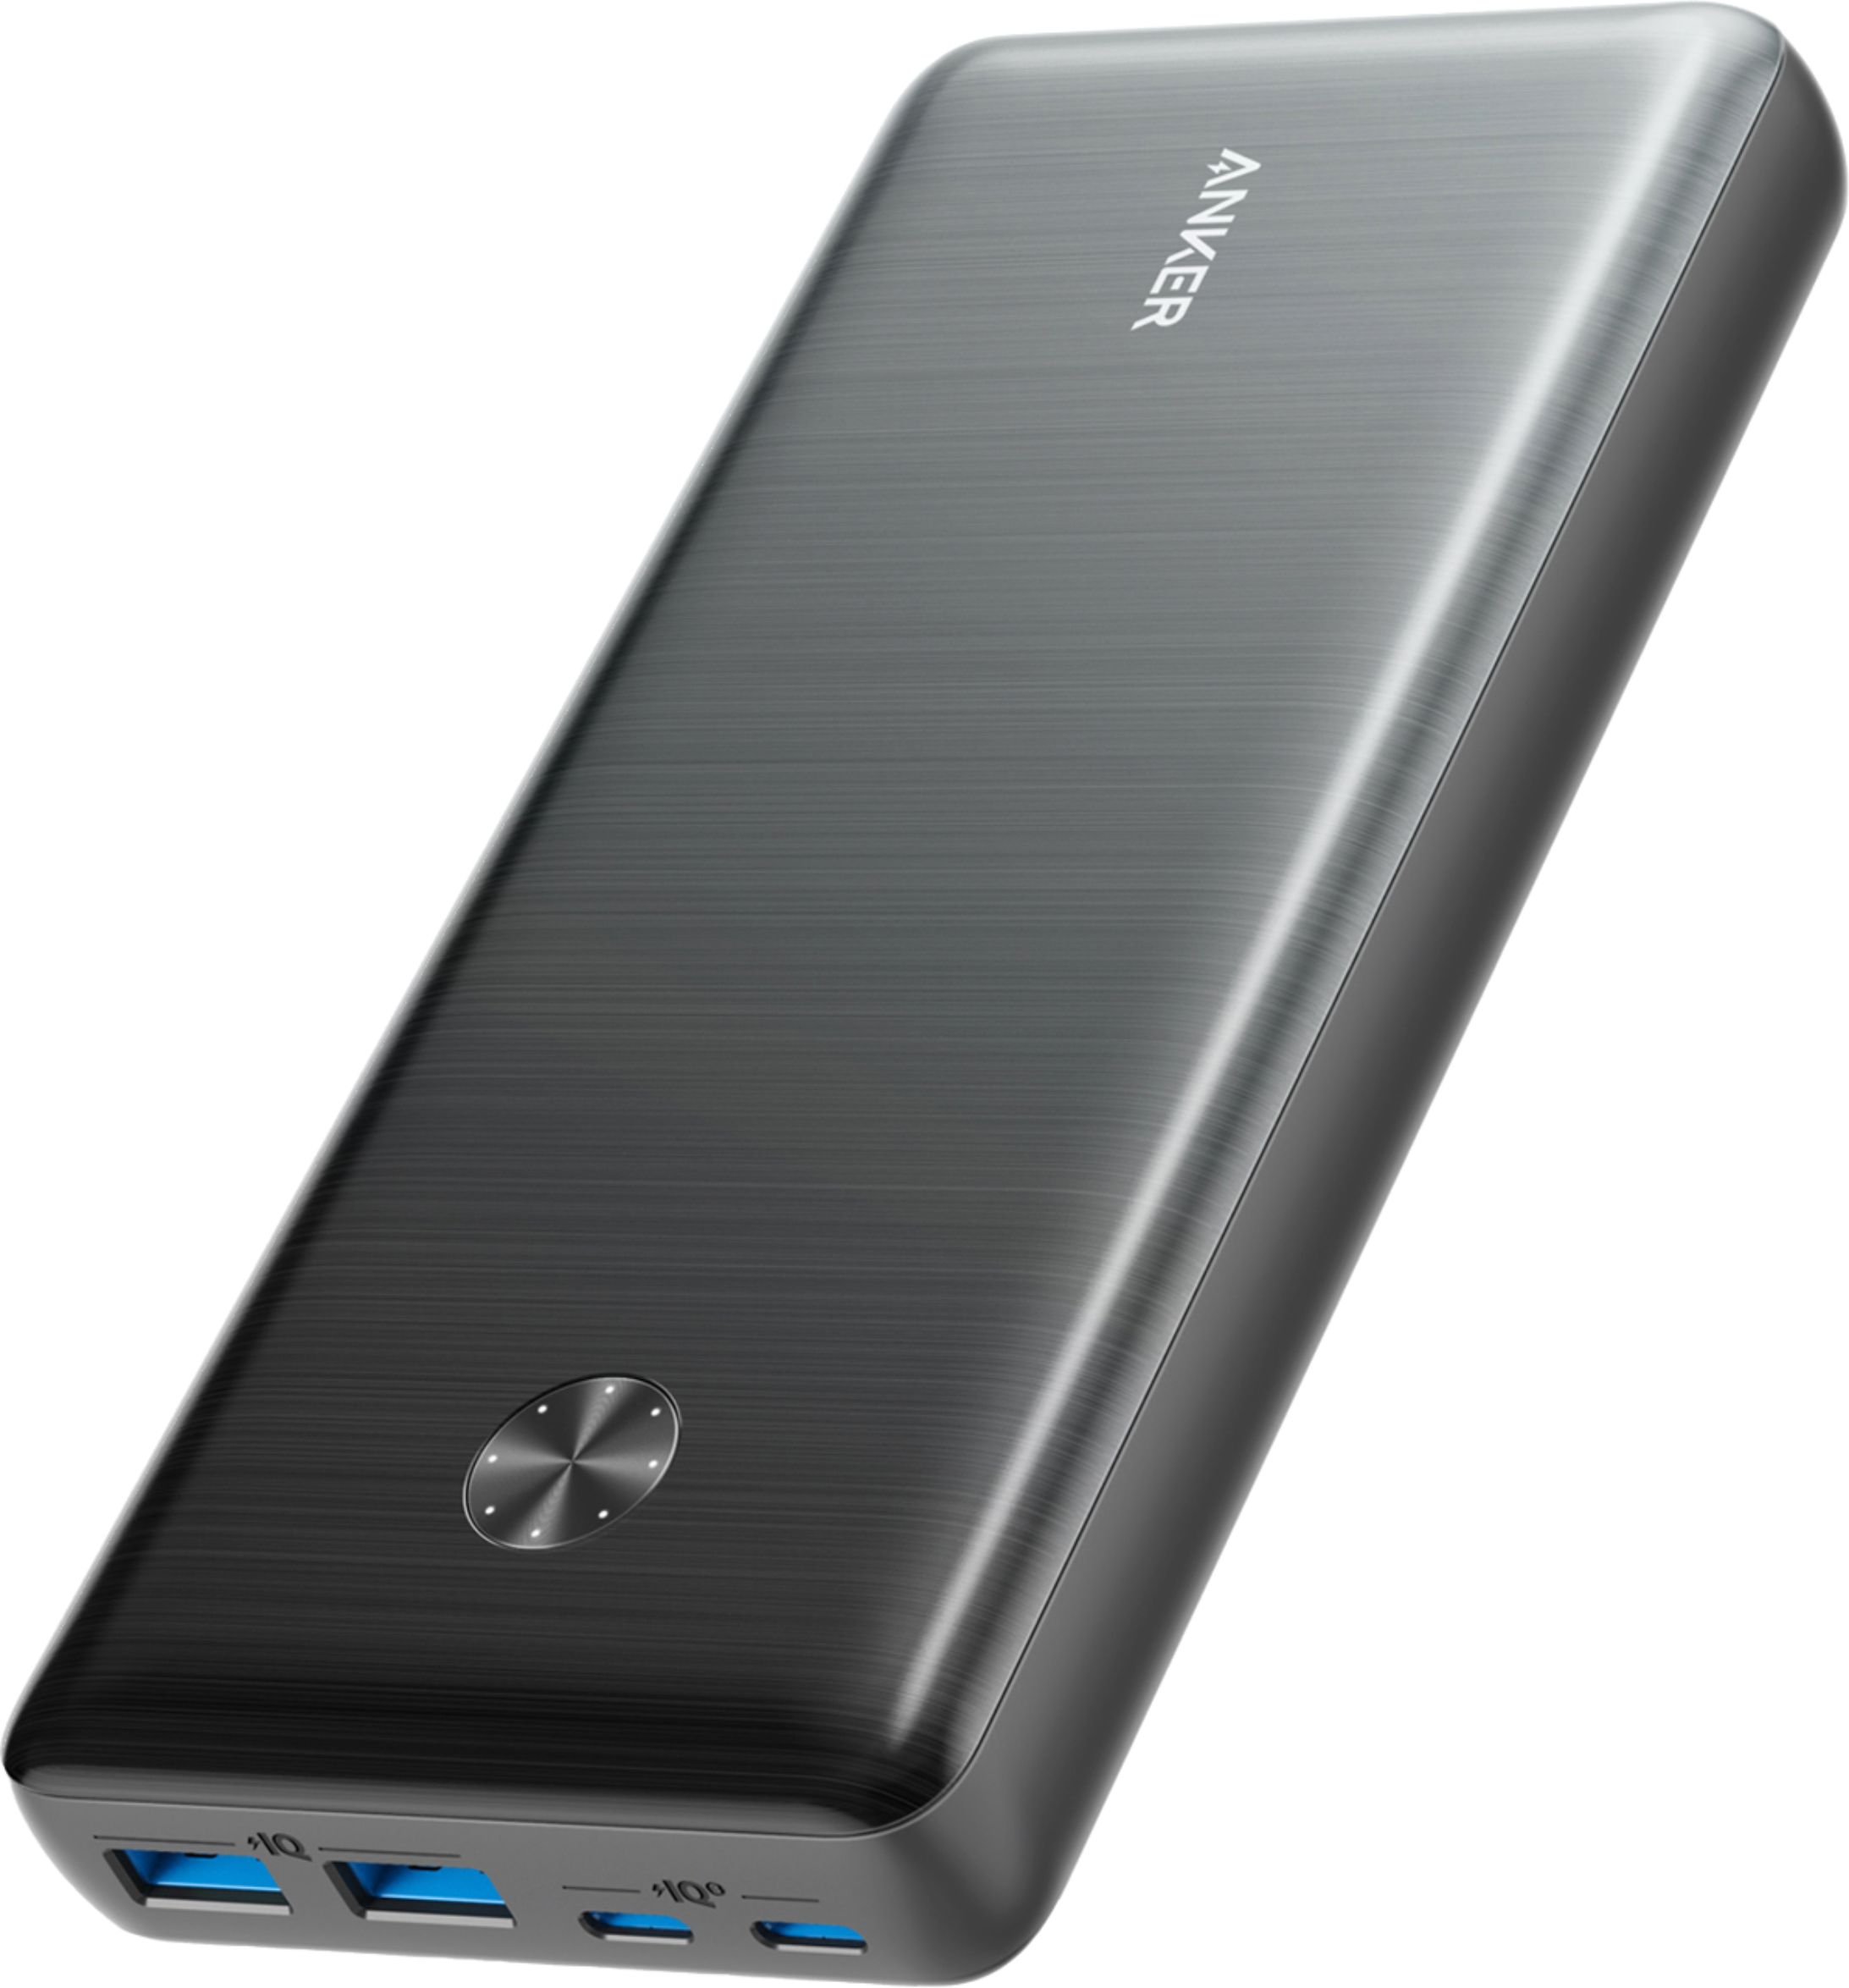 Anker PowerCore III Elite 25600 mah 87W USB-C PD Portable Charger Black  A1291H11-1 - Best Buy